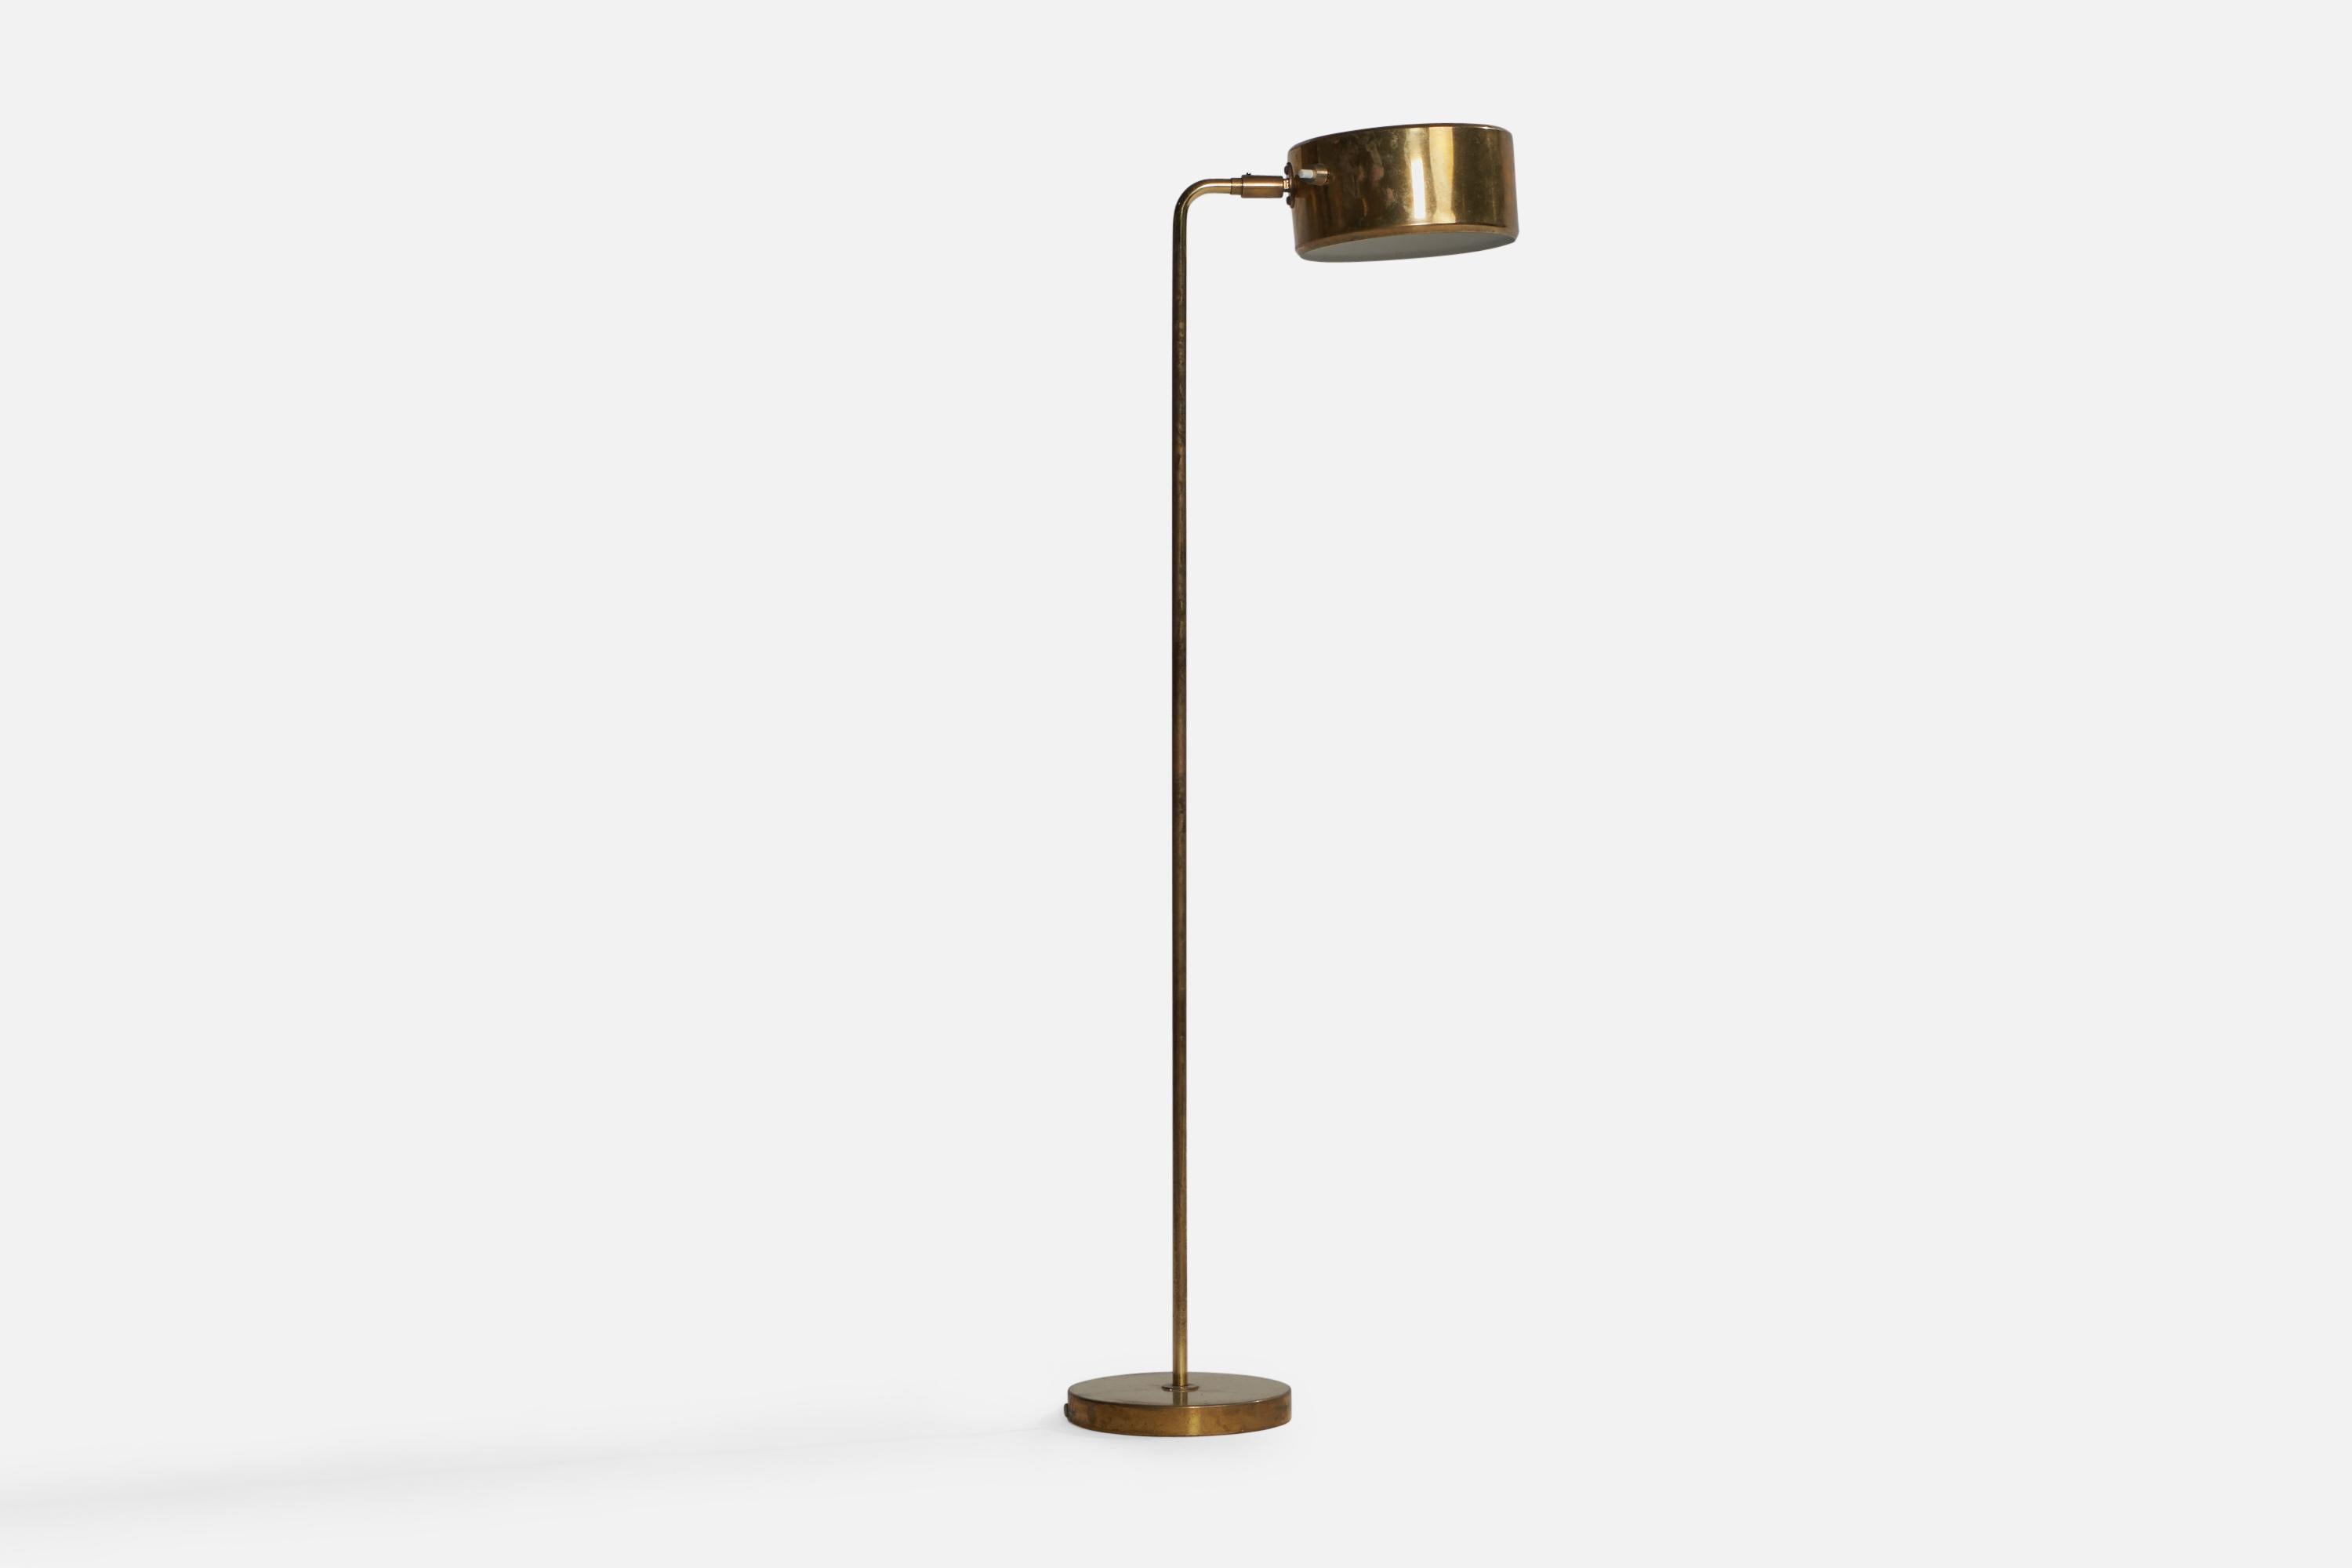 A brass floor lamp designed by Anders Pehrson and produced by Ateljé Lyktan, Sweden, c. 1970s.

Overall Dimensions (inches): 44.5” H x 7.5” W x 11” D.
Dimensions vary based on position of light.
Bulb Specifications: E-14 Bulbs
Number of Sockets: